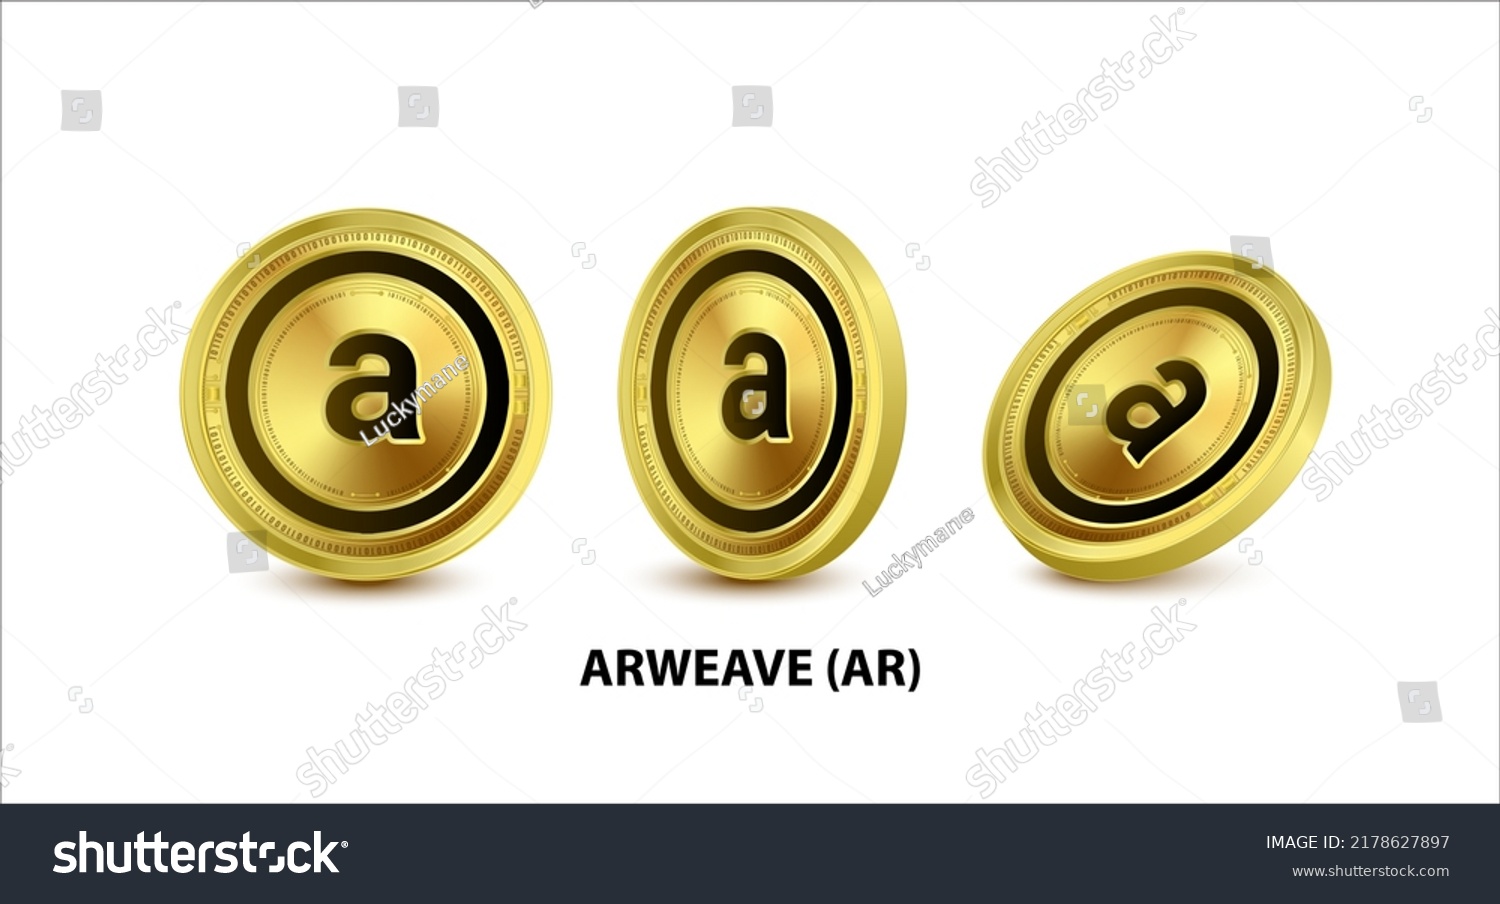 SVG of Set of Gold coin Arweave (AR) Vector illustration. Digital currency. Cryptocurrency Golden coins with bitcoin, ripple ethereum symbol isolated on white background. 3D isometric Physical coins. svg